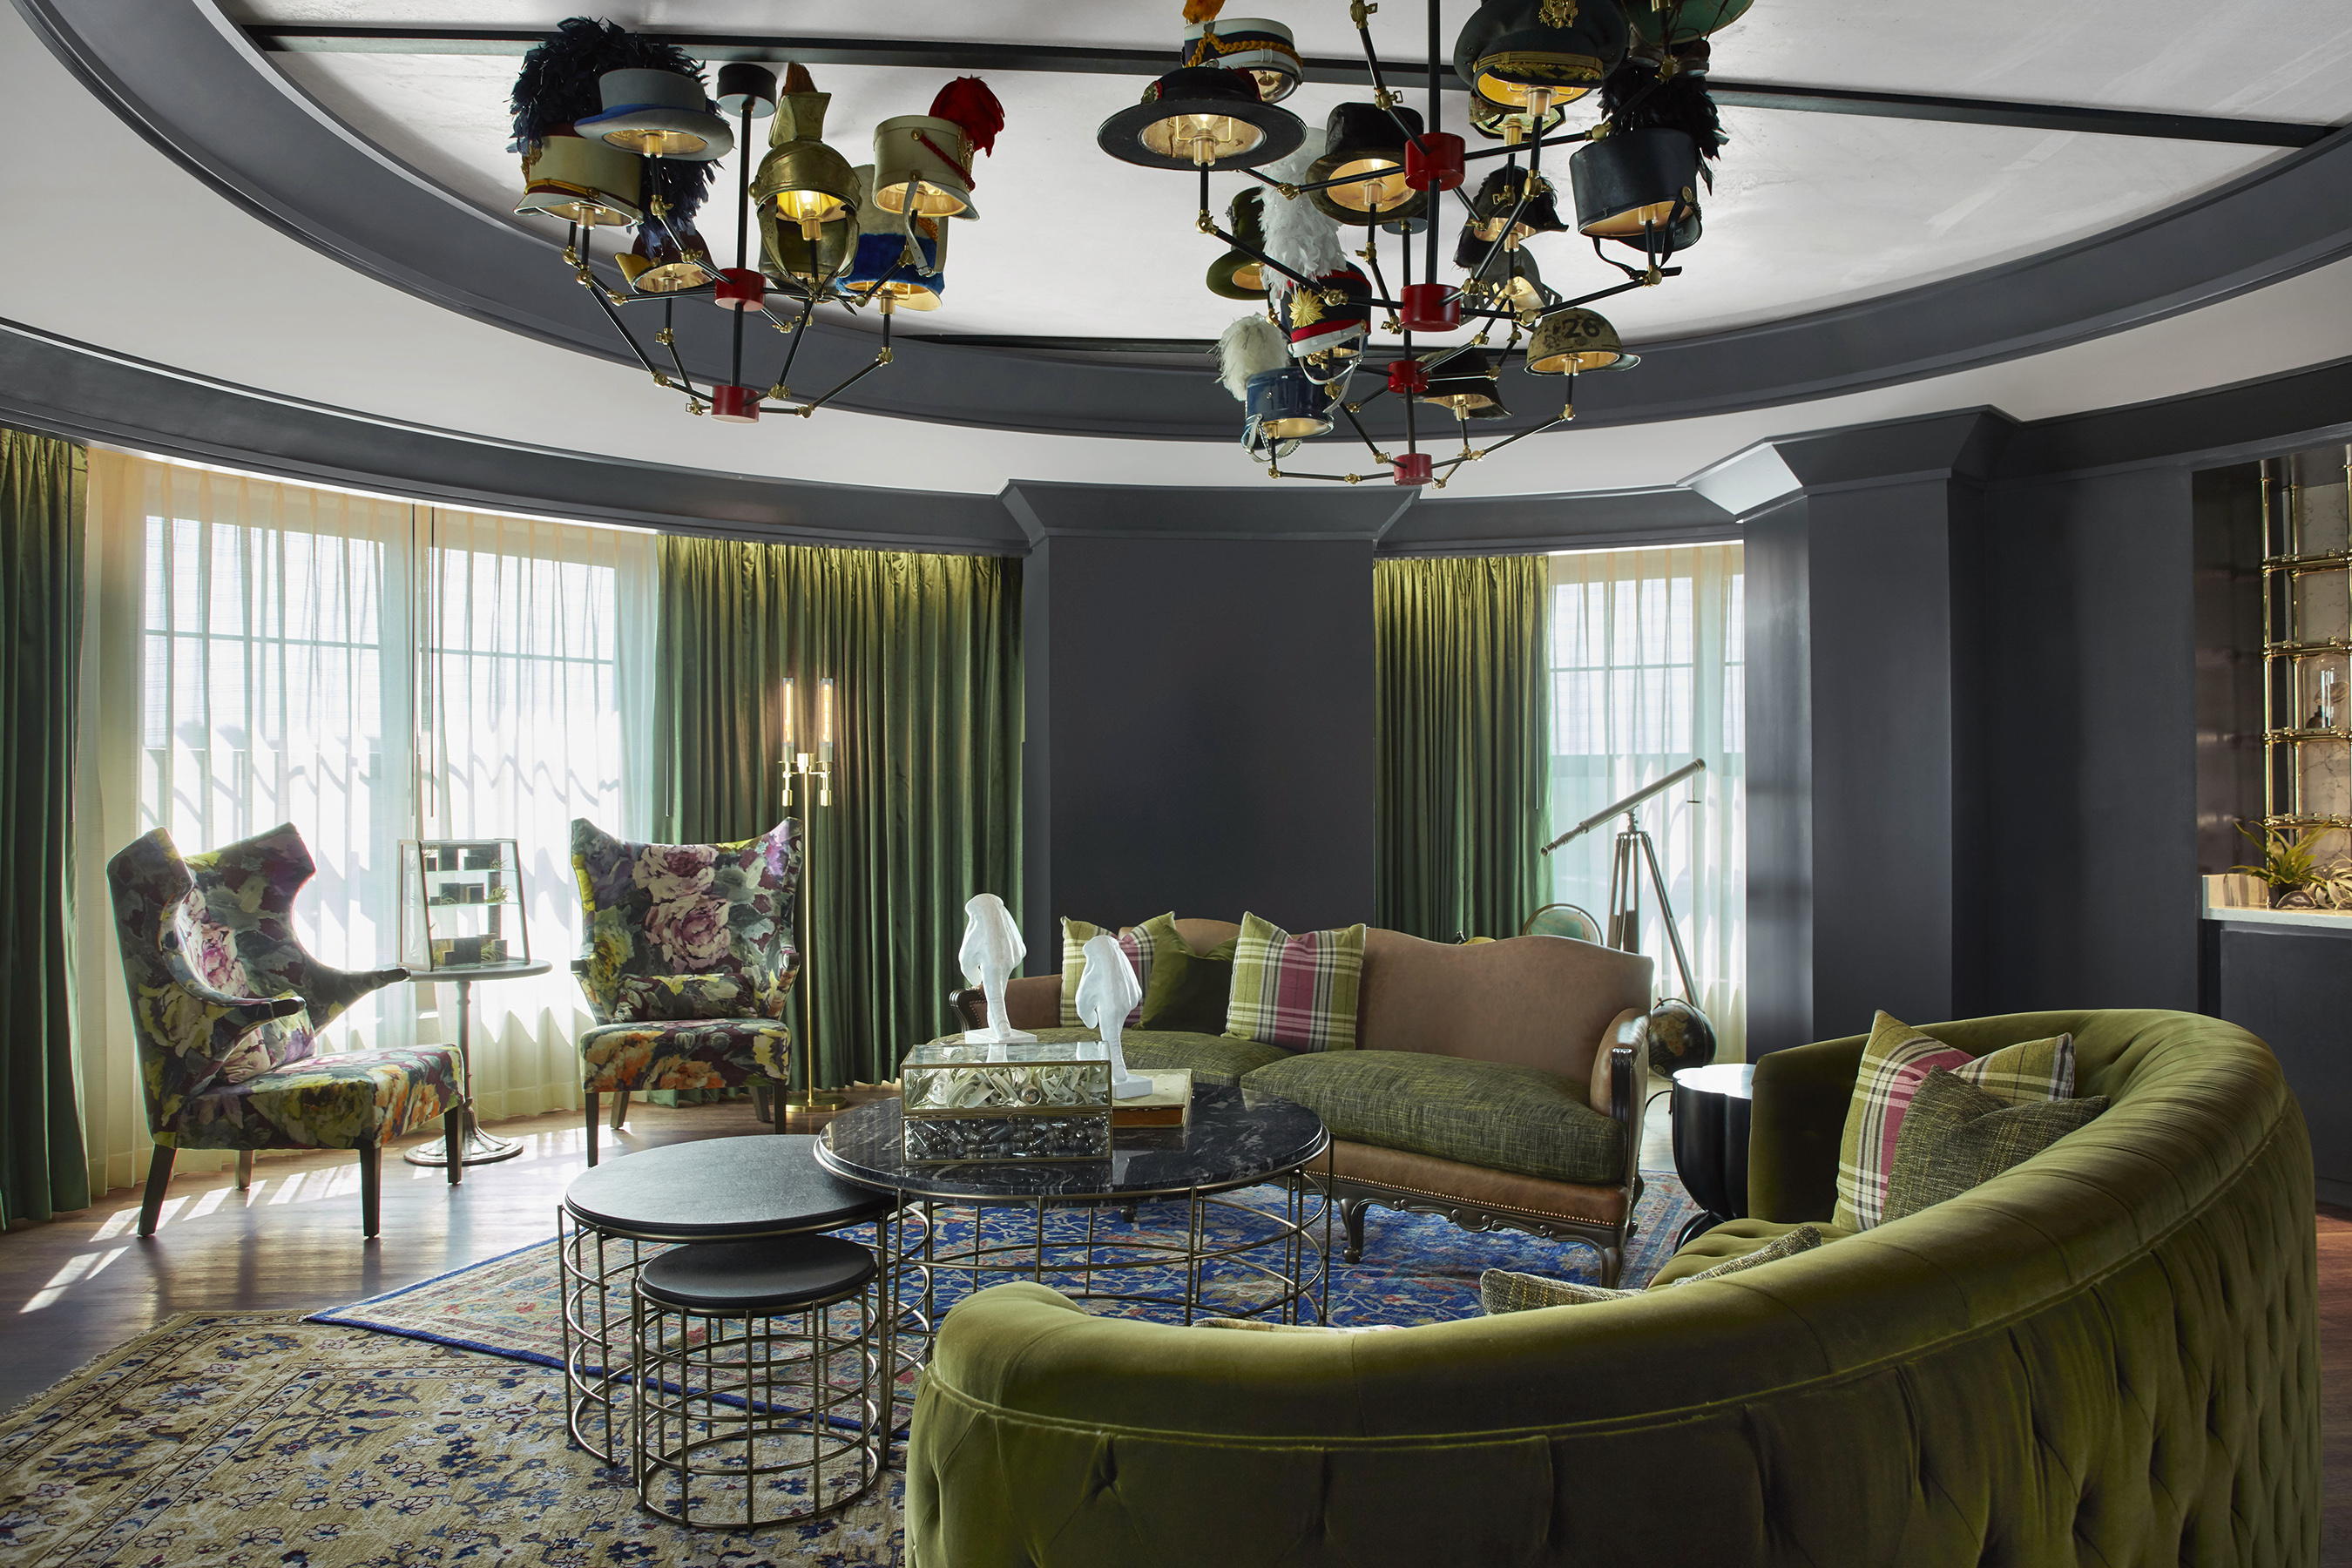 MGM Springfield’s whimsical Presidential Suite features a chandelier adorned with hats.